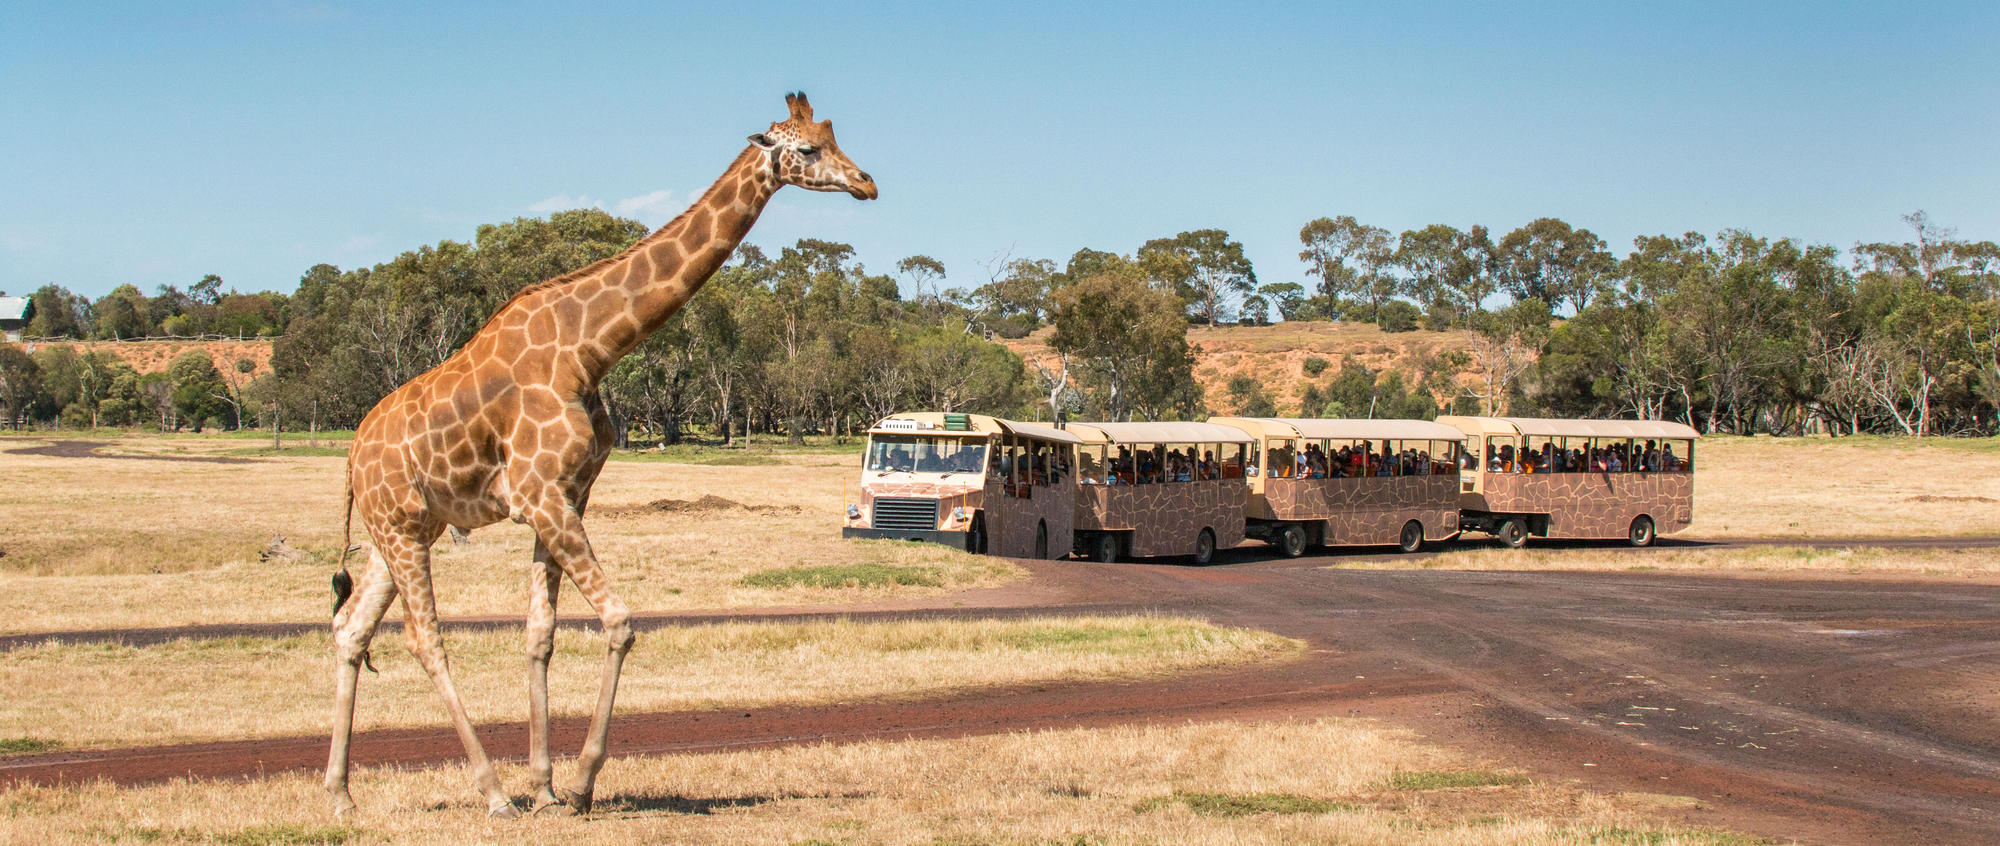 Giraffe walking in foreground across a grassy field. A bus with four carriages is driving in the background.